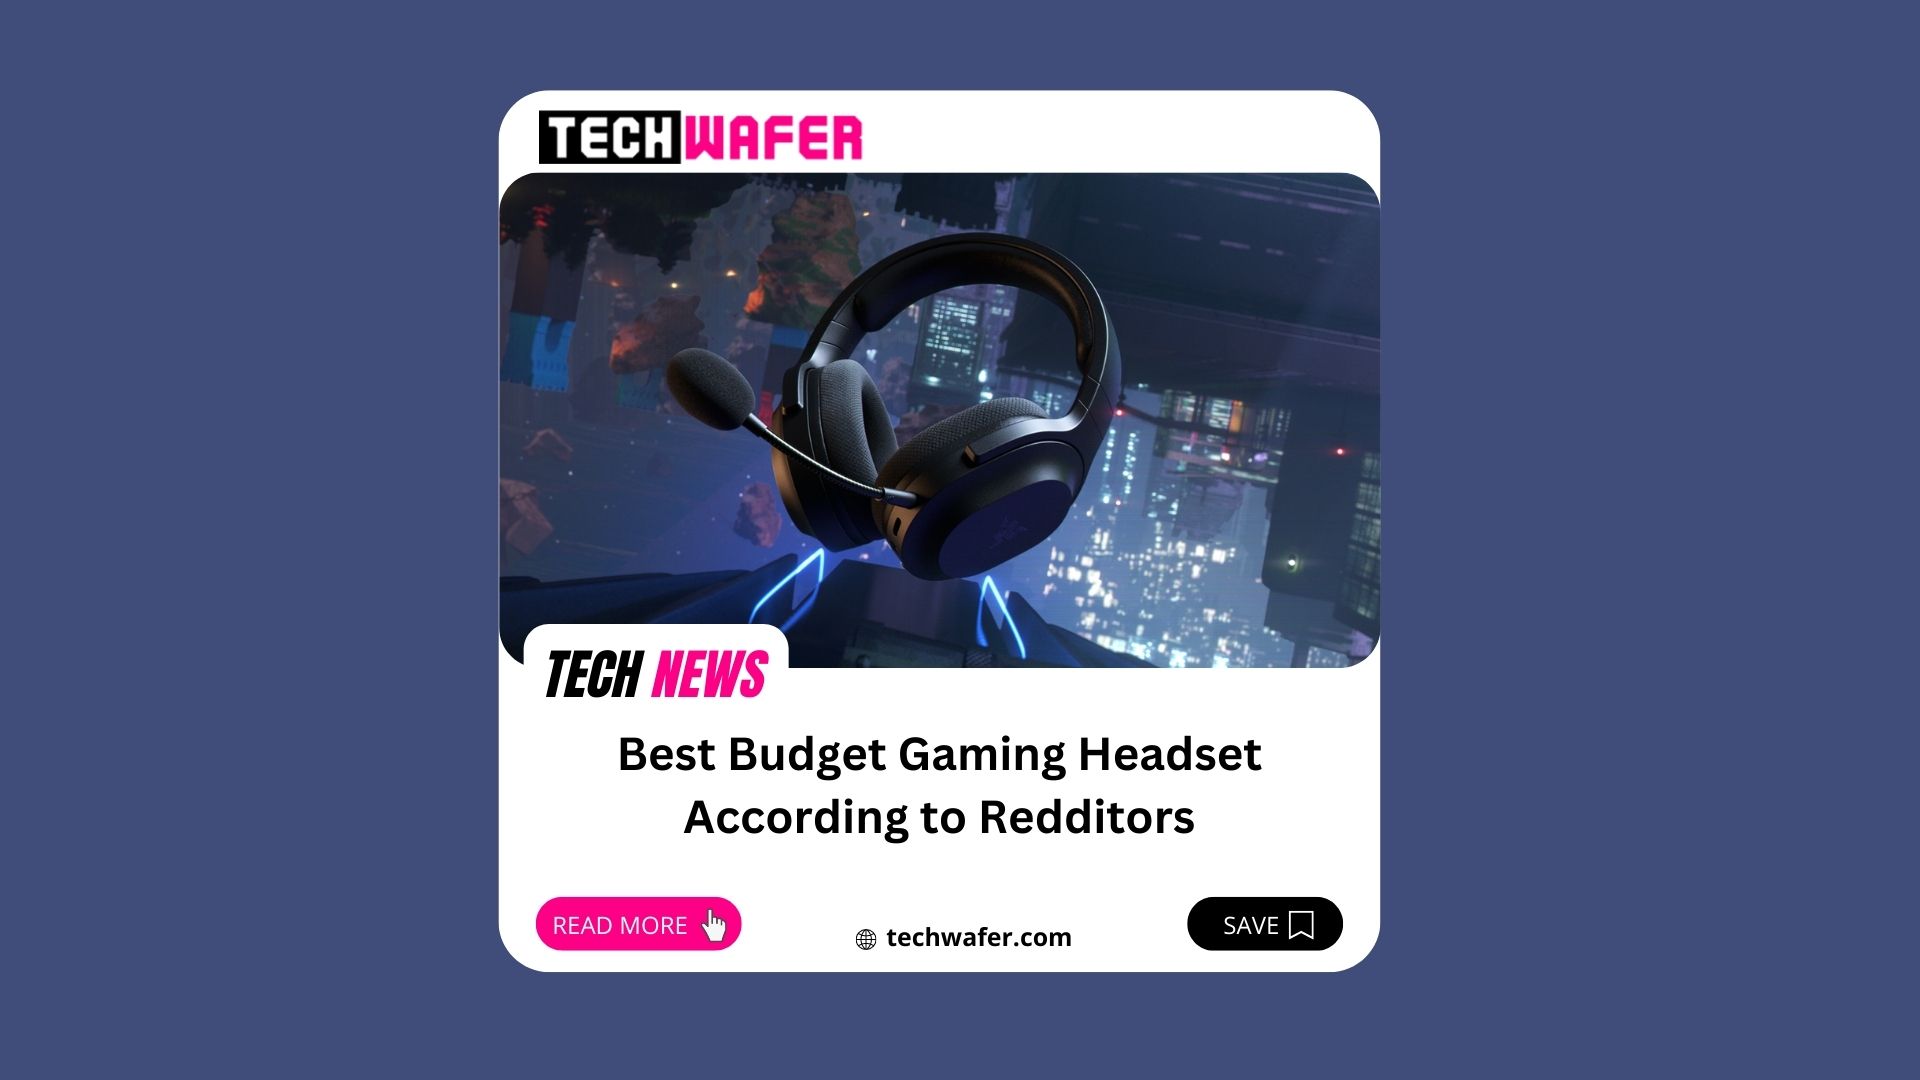 Best Budget Gaming Headset According to Redditors